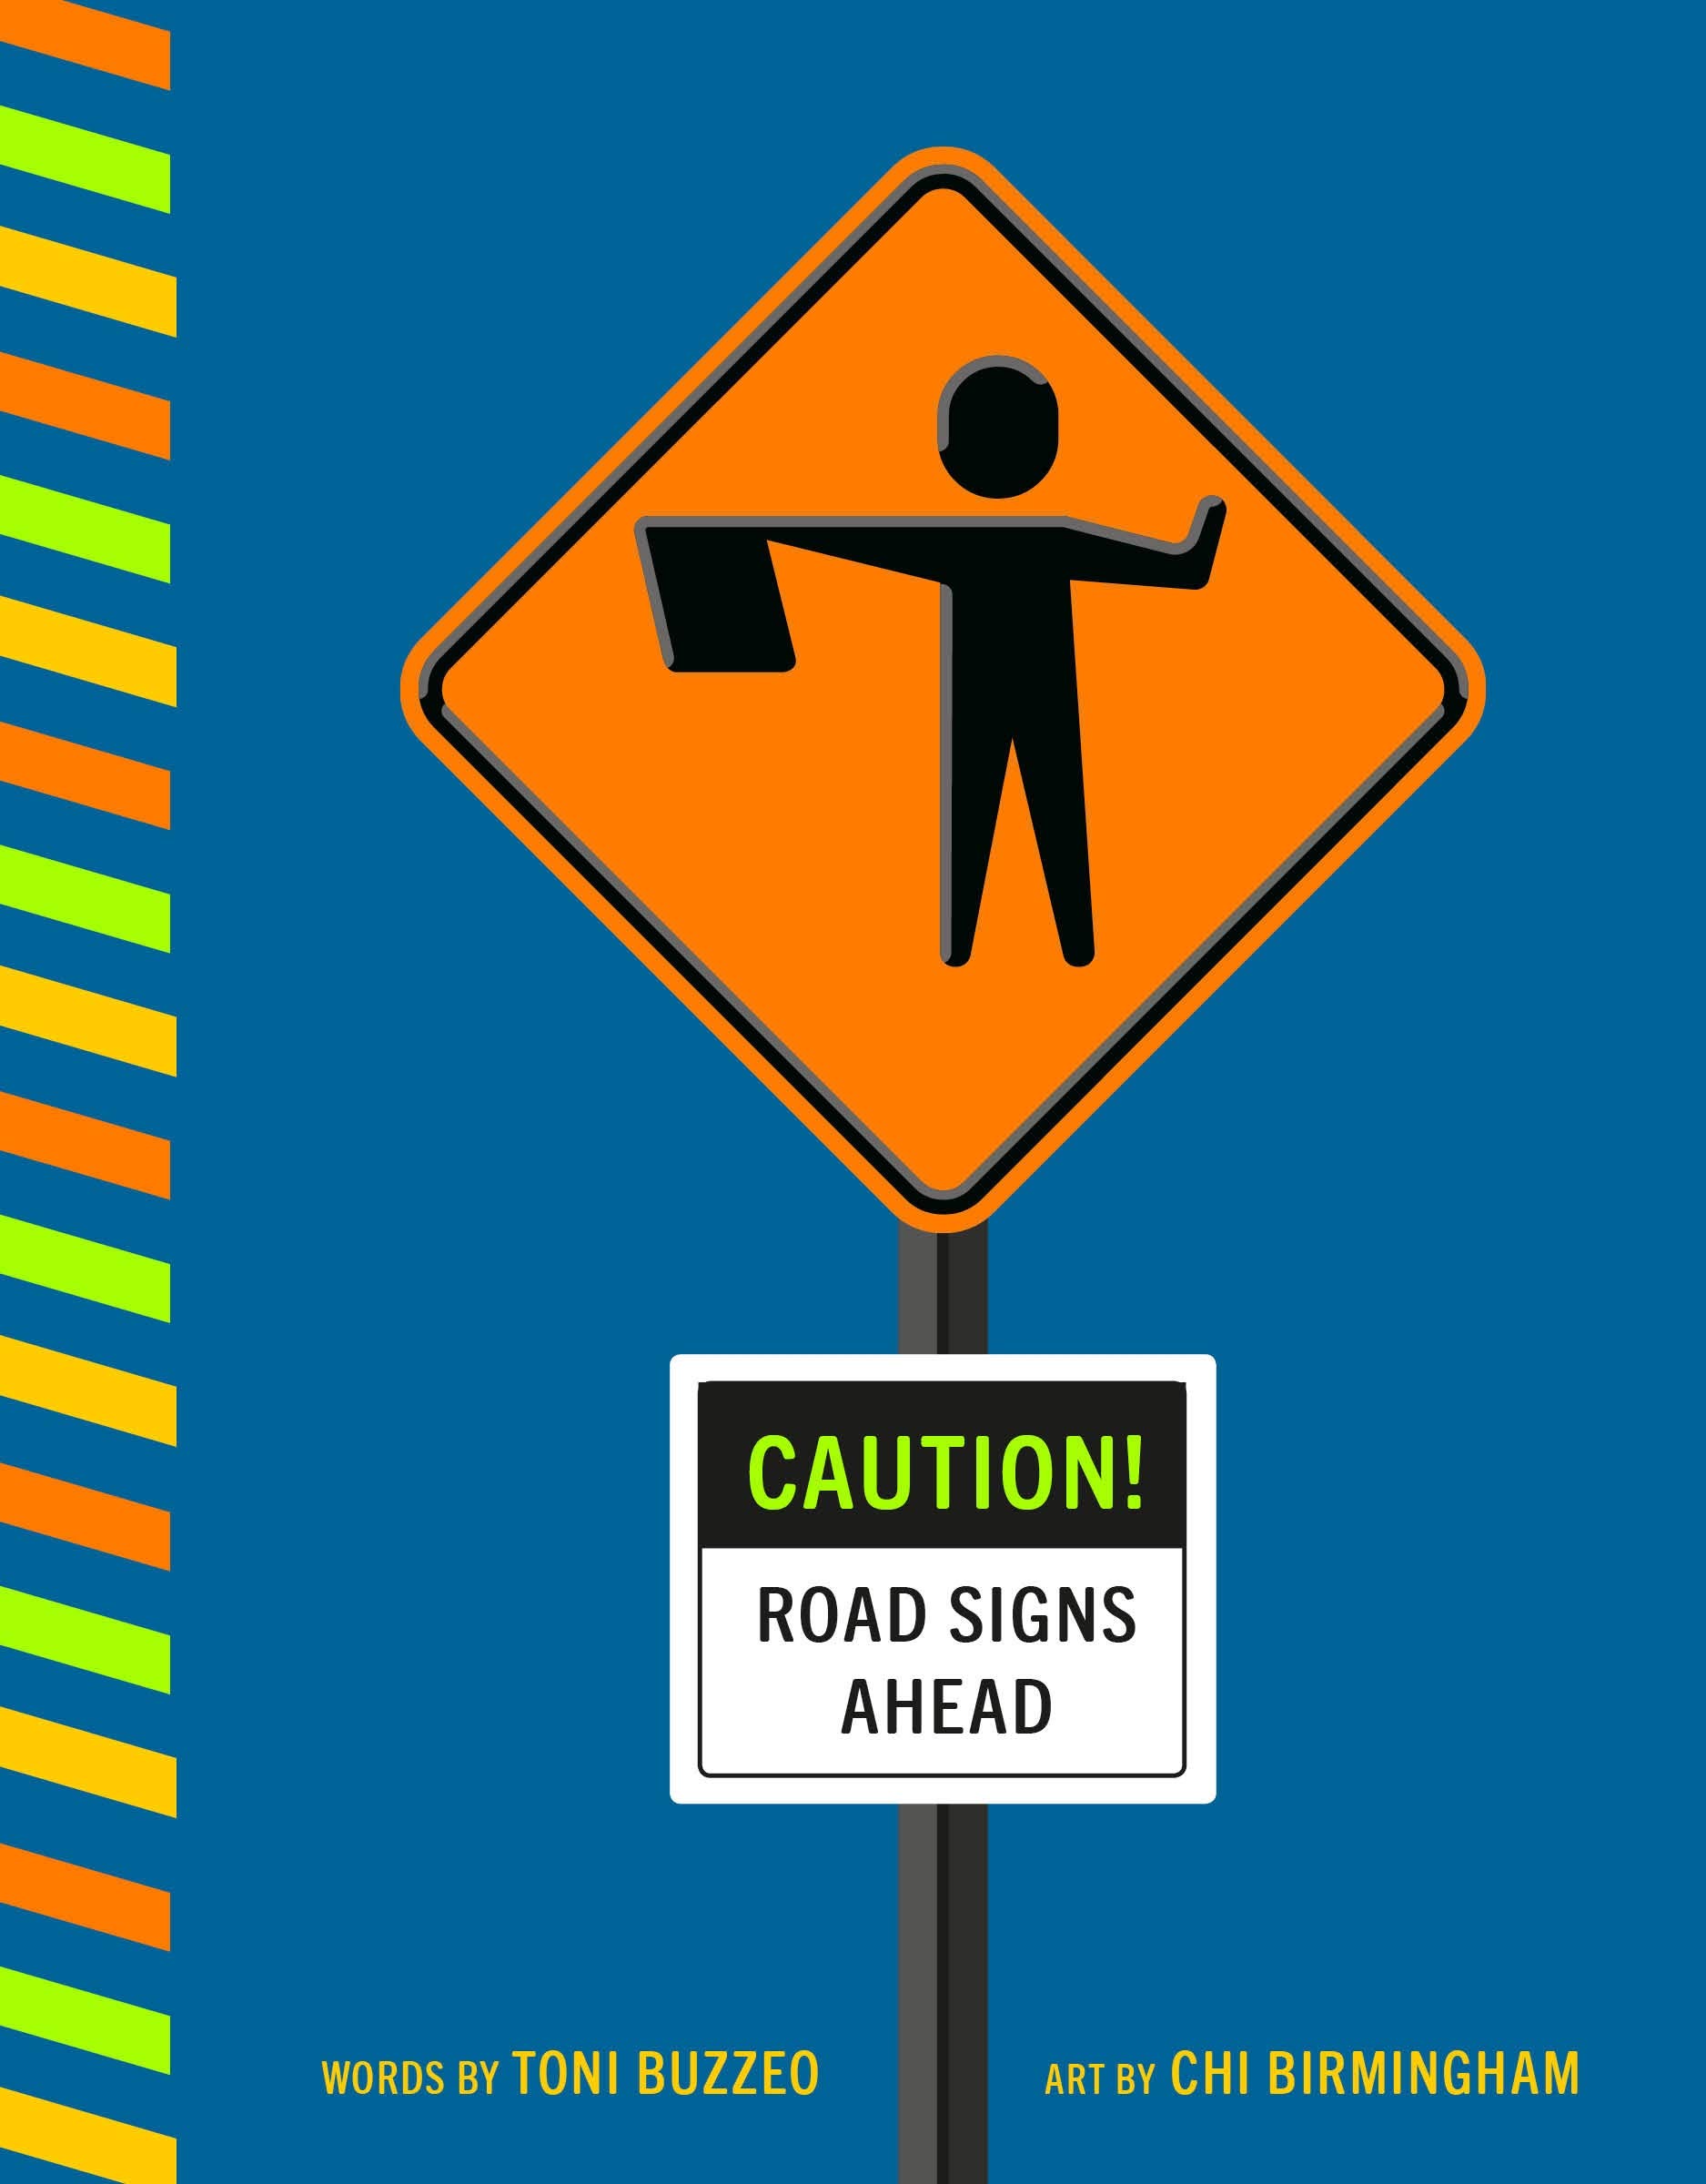 Caution! Road Signs Ahead